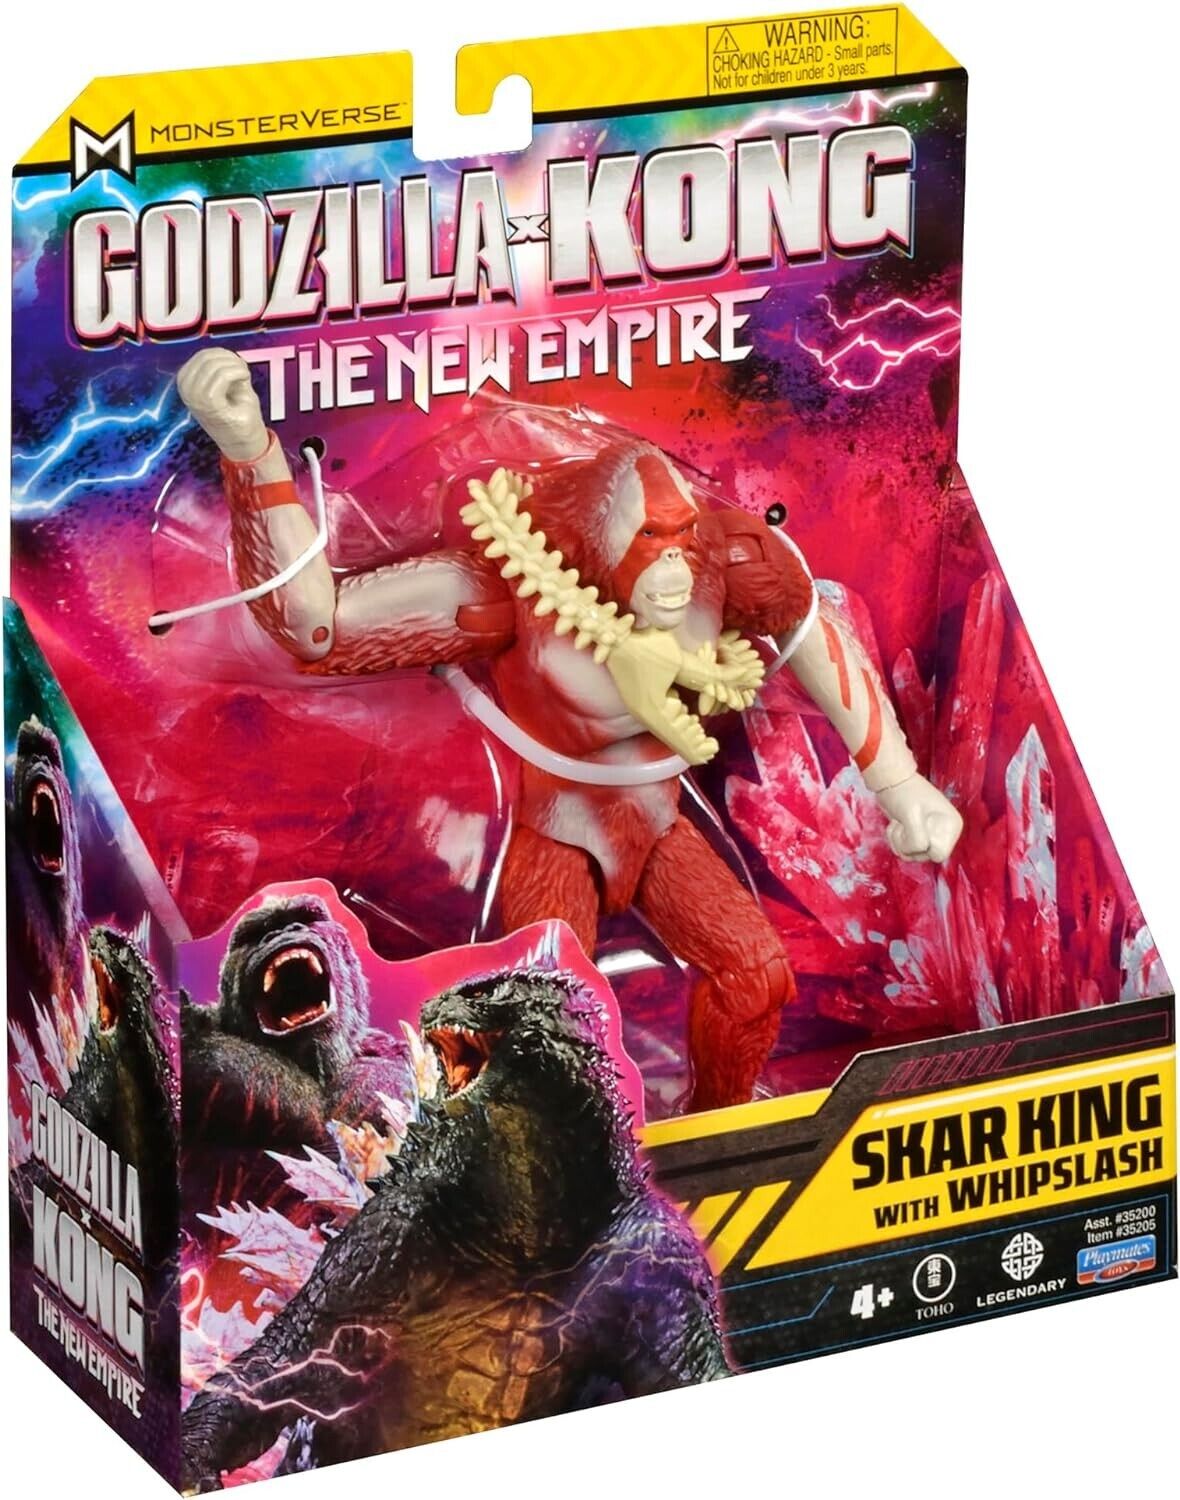 Godzilla x Kong: The New Empire, 6-Inch Skar King Action Figure Toy, Iconic Coll